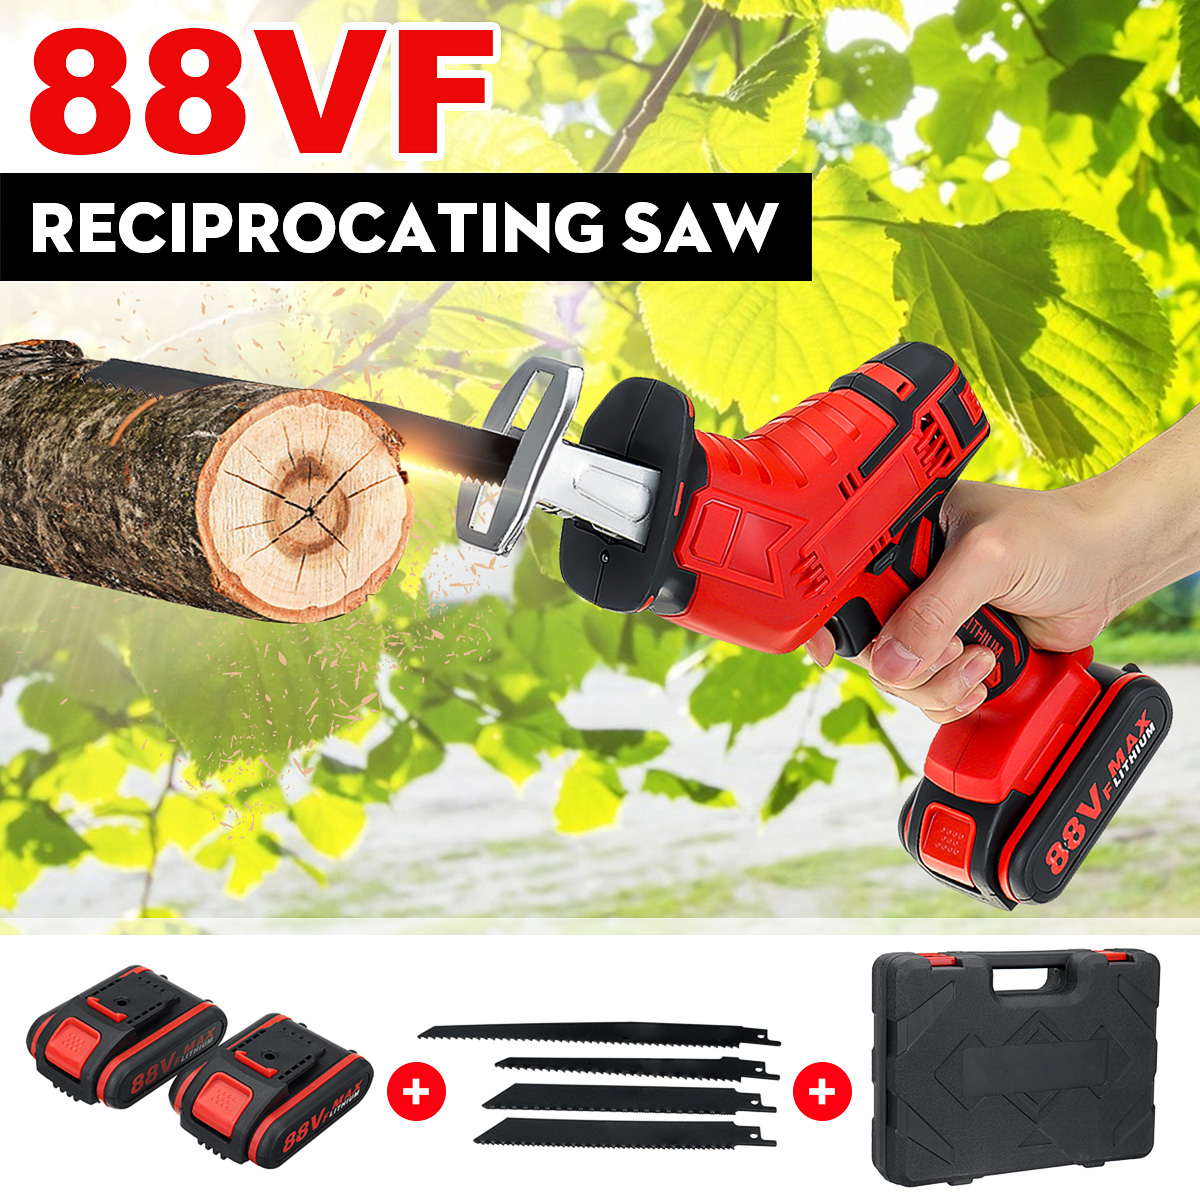 88VF-Electric-Reciprocating-Saw-Outdoor-Cordless-Portable-Saw-Woodworking-Cutter-1733463-1